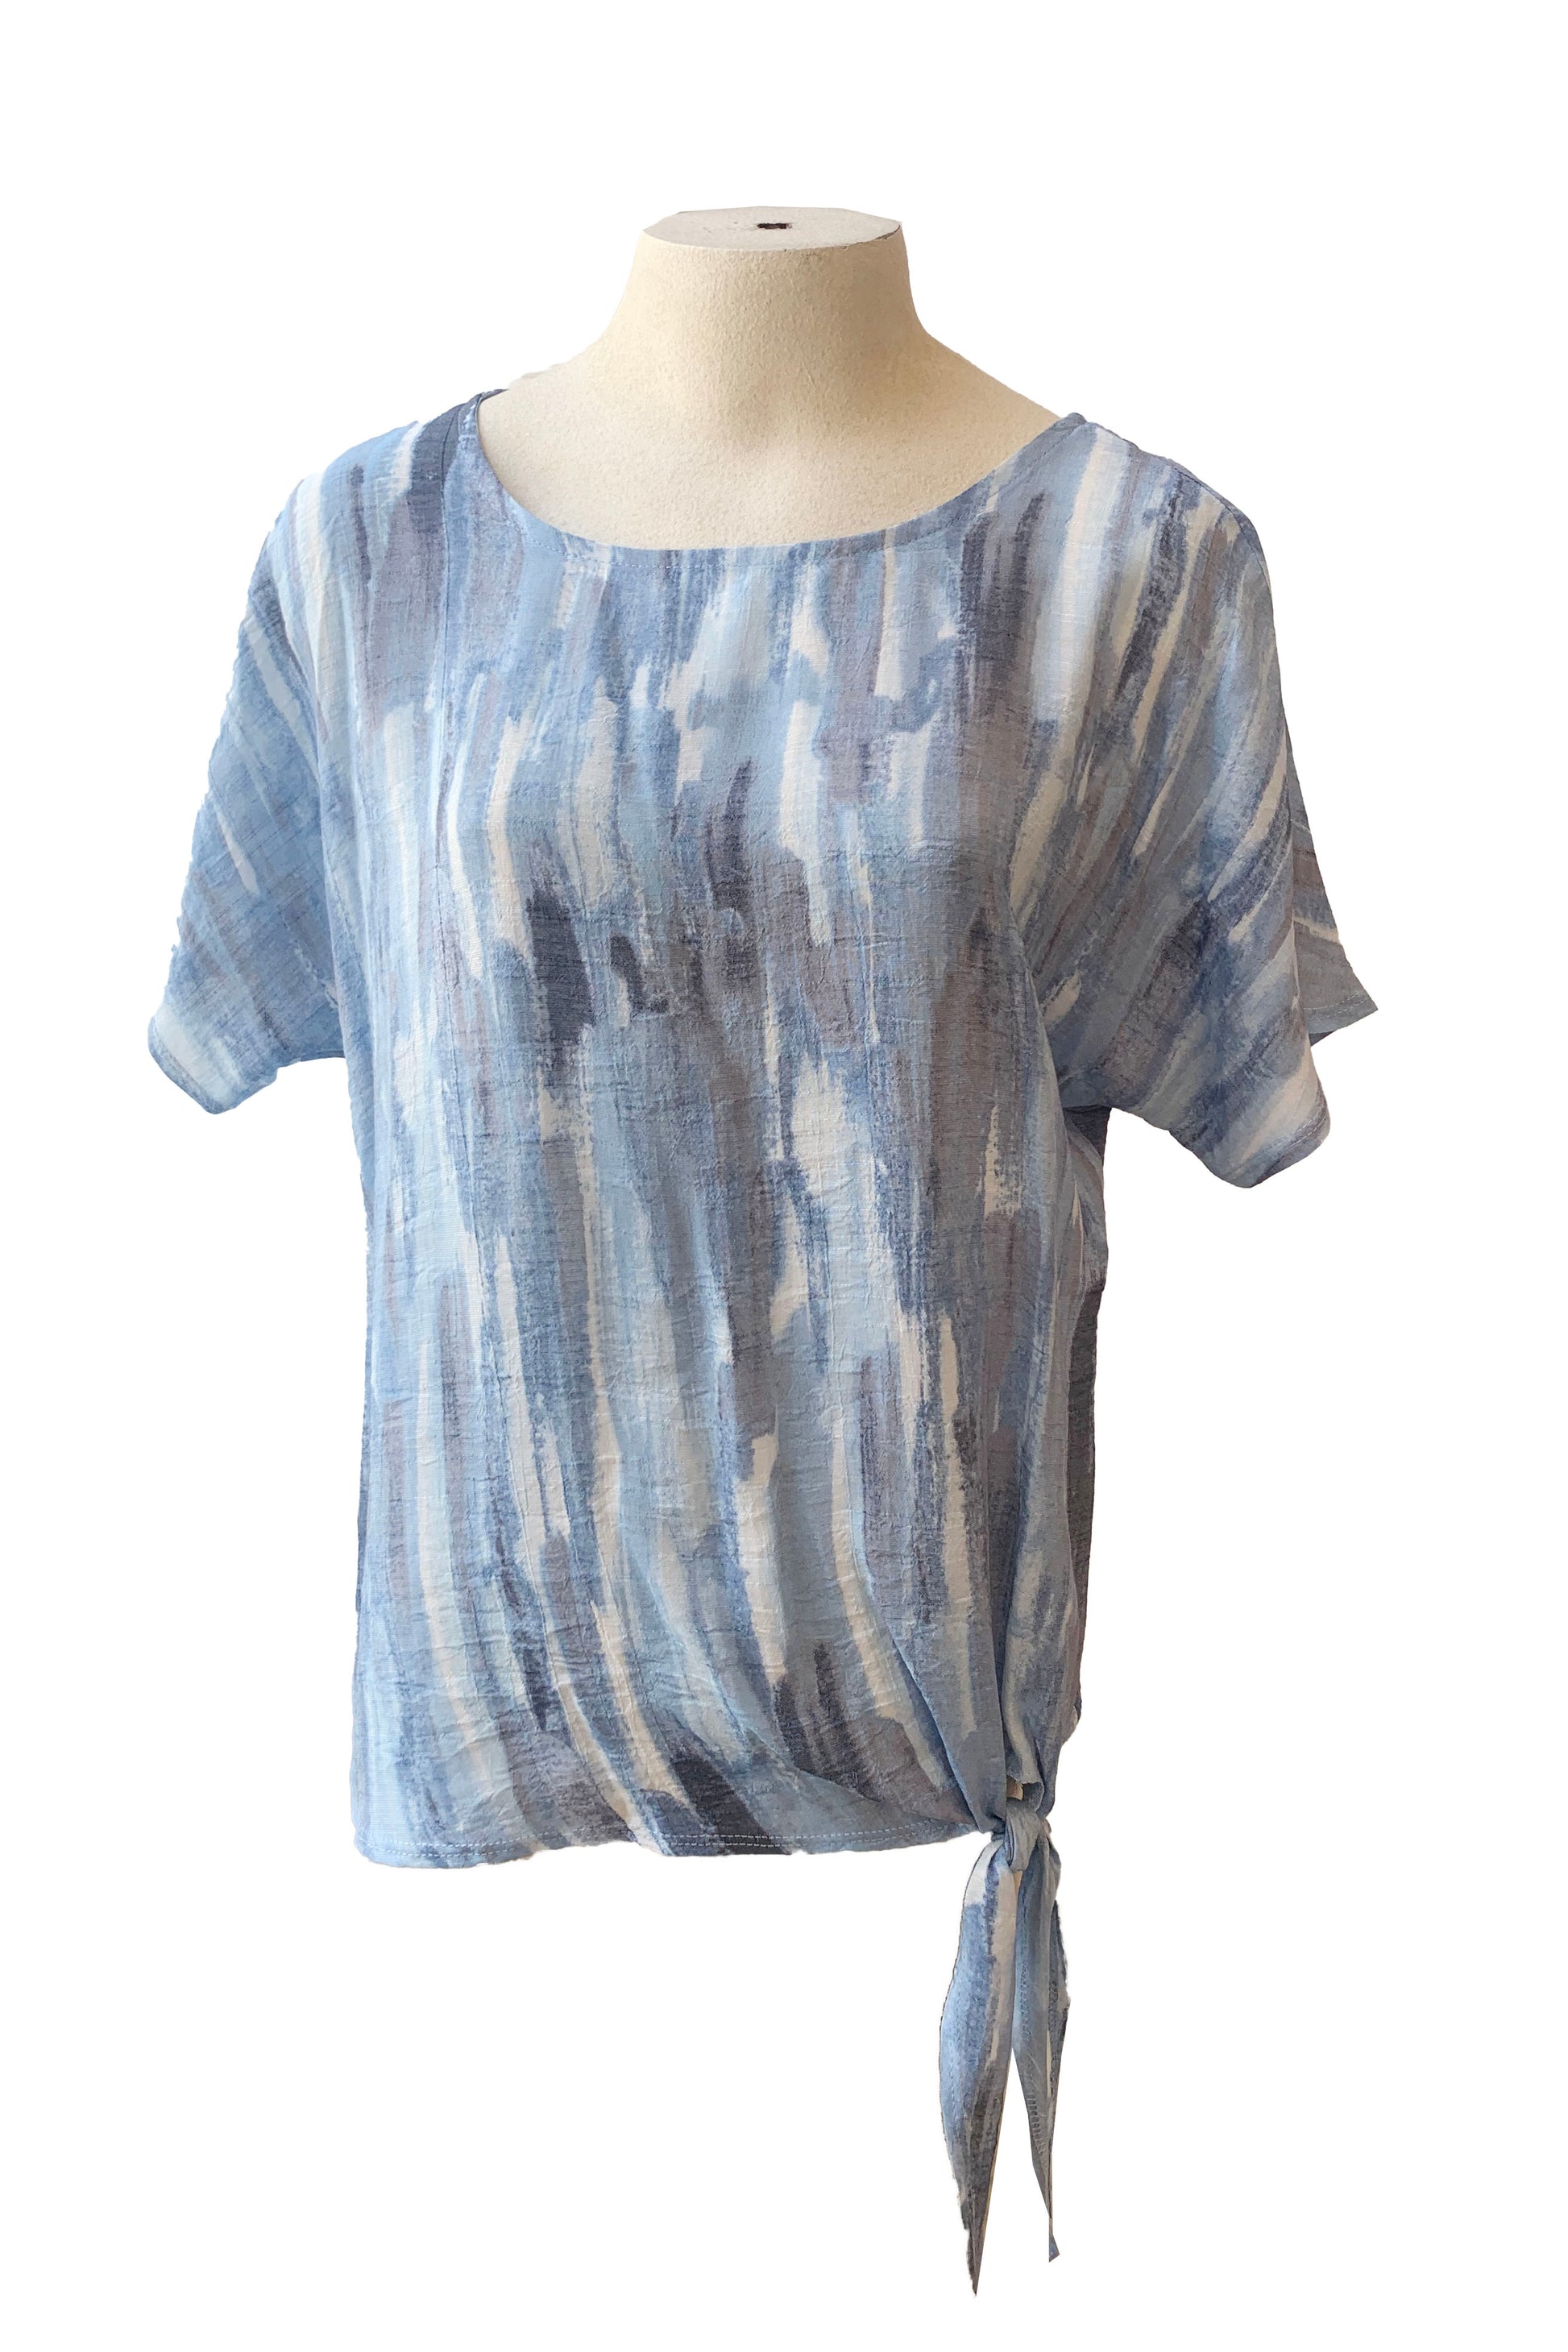 The Chanelle Top by Pure Essence in Sky/Blue is shown on a mannequin in front of a white background